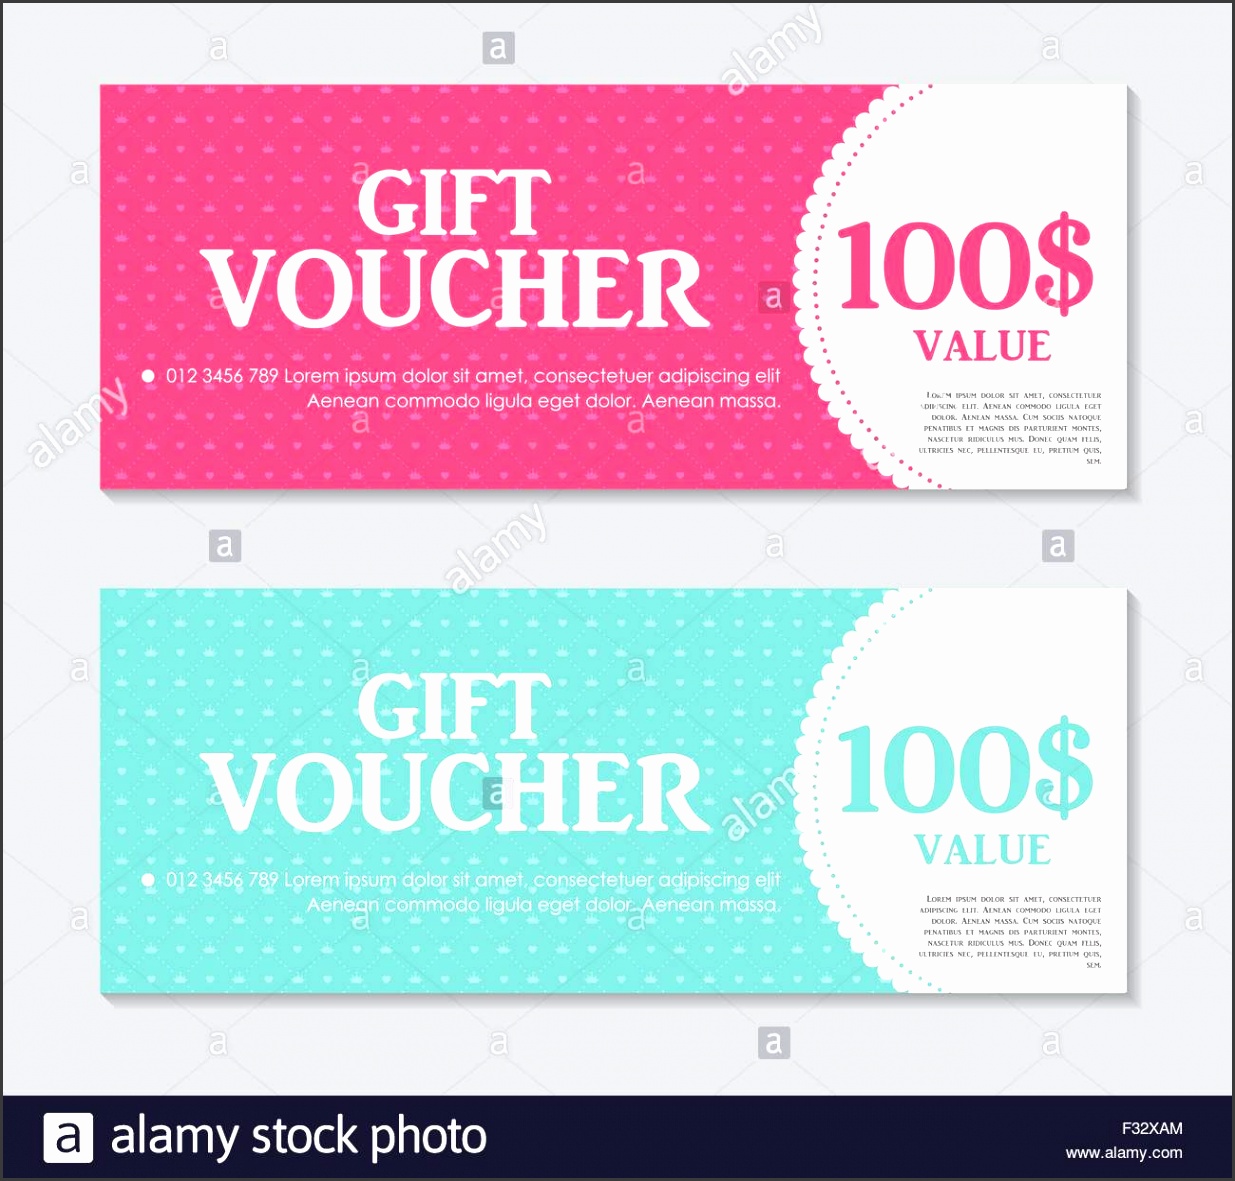 Gift Voucher Template with Sample Text Vector Illustration